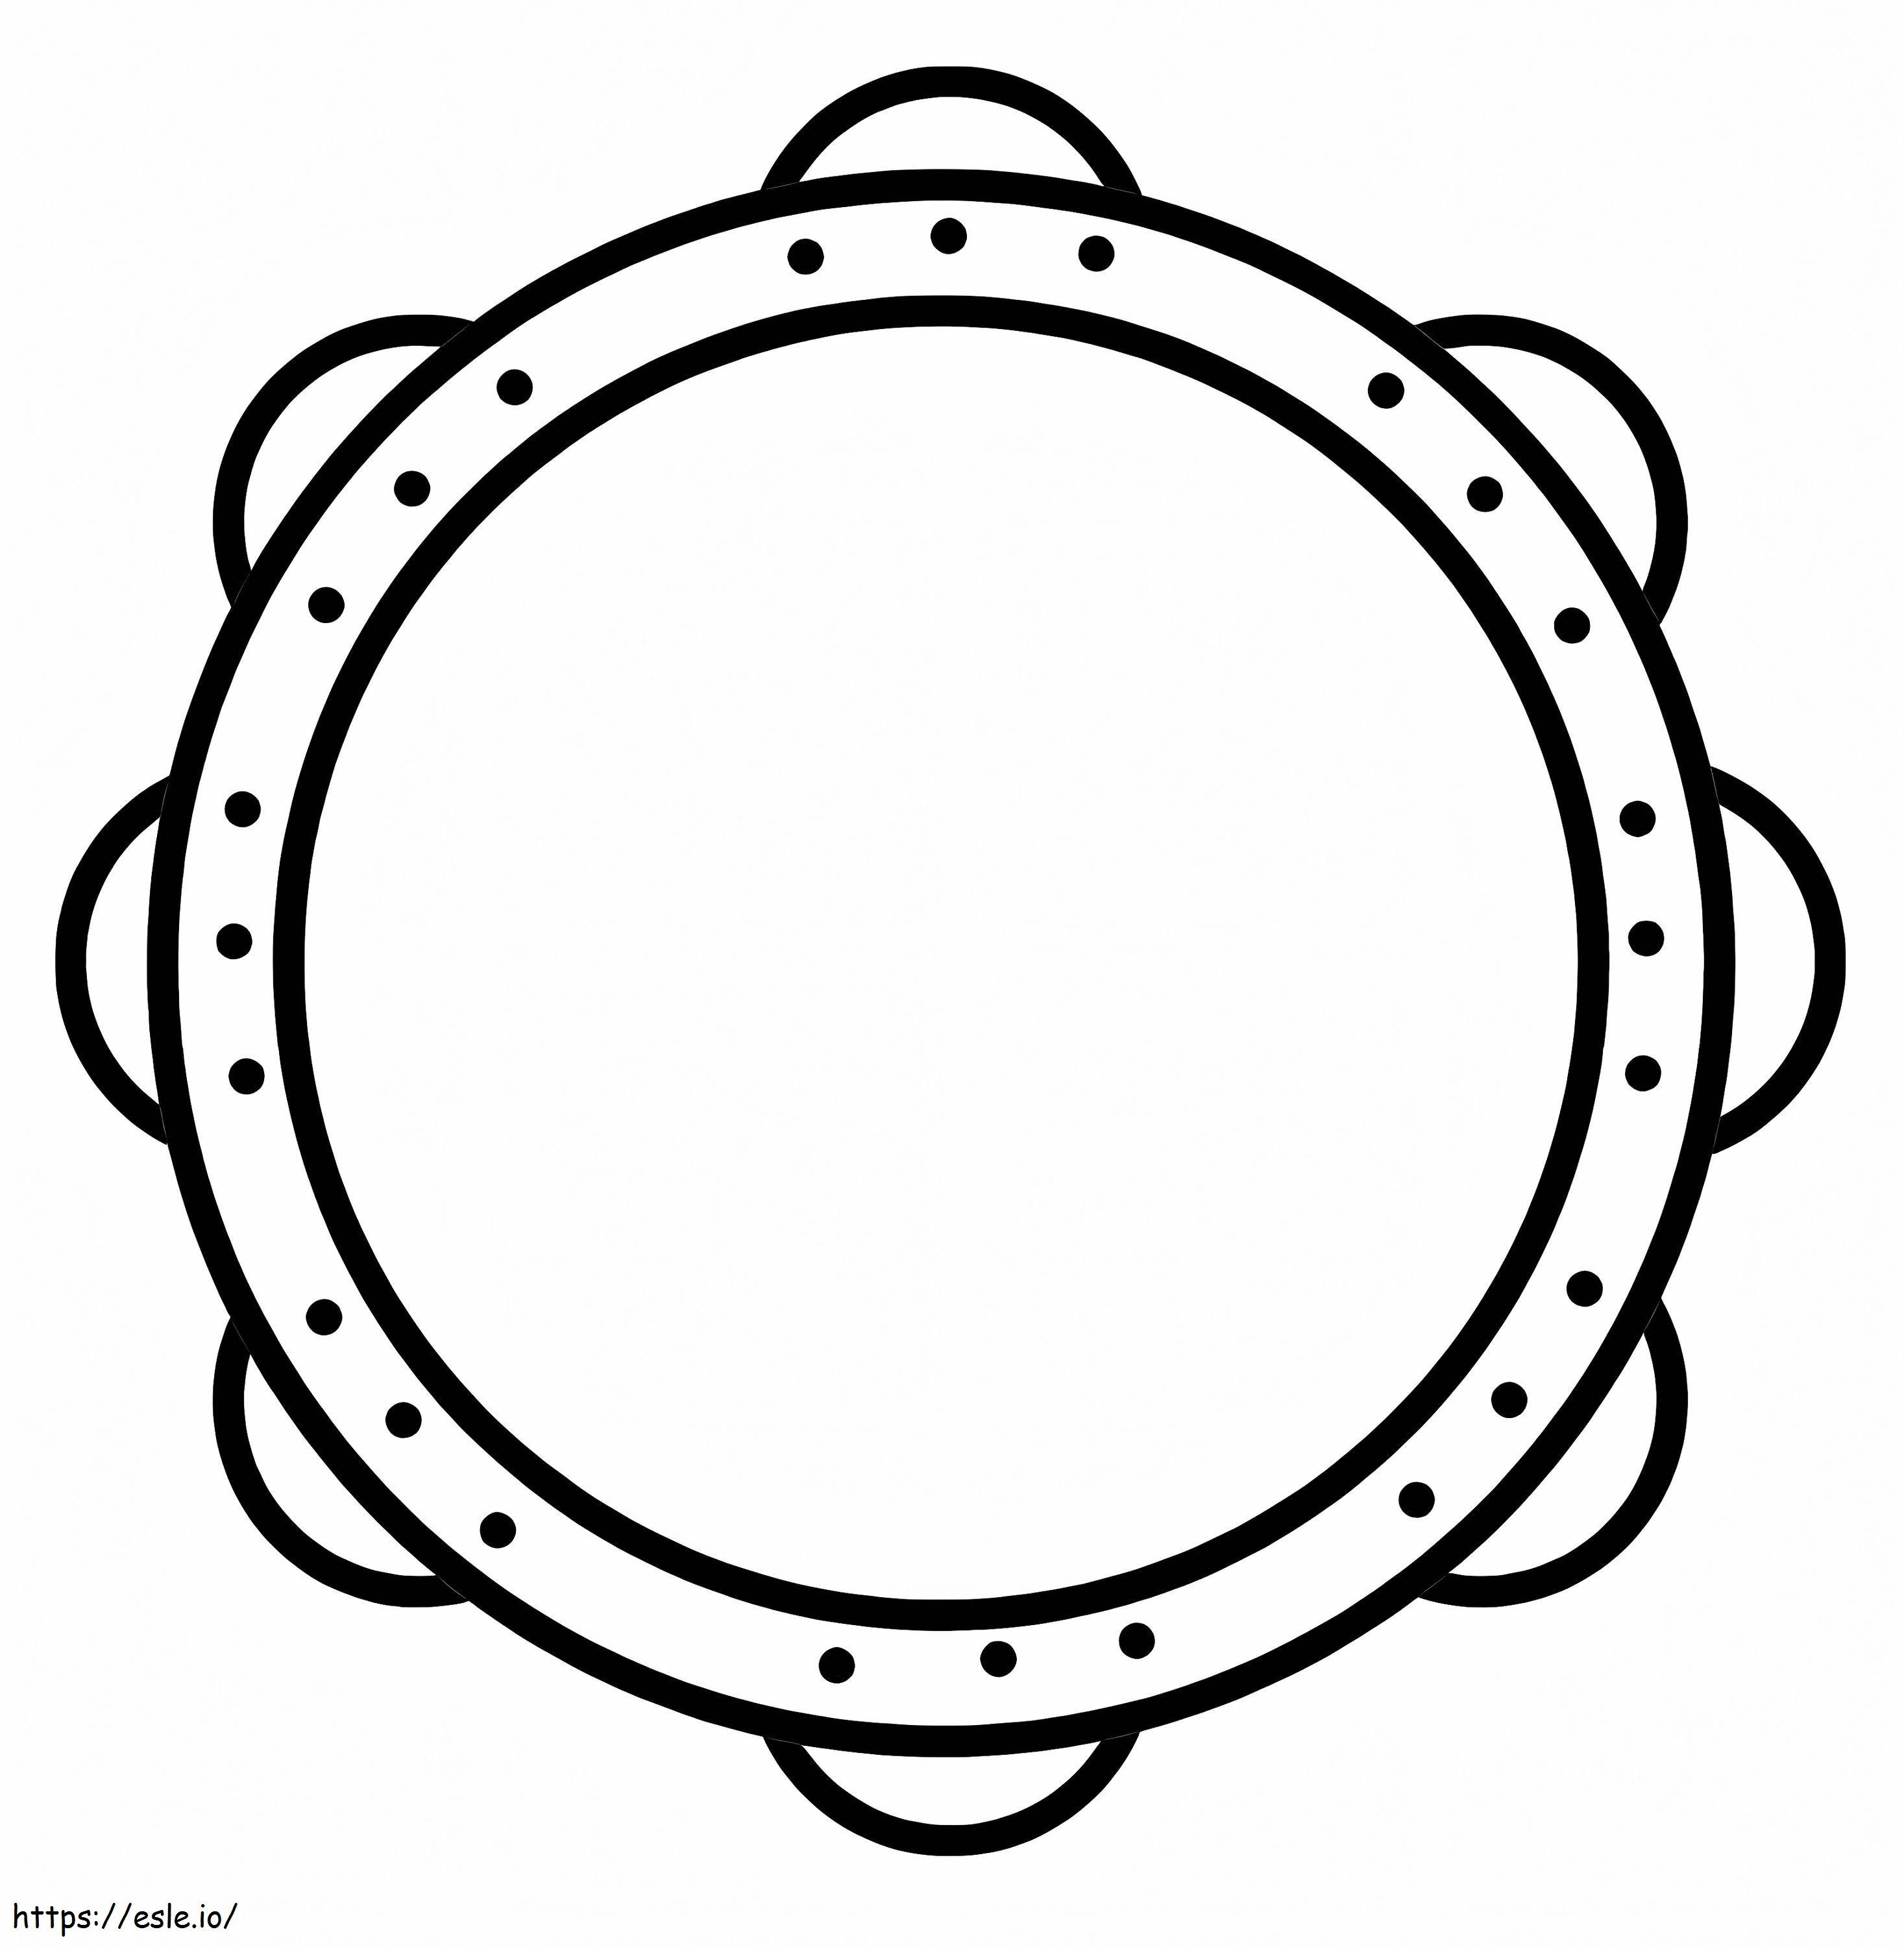 Simple Tambourine coloring page